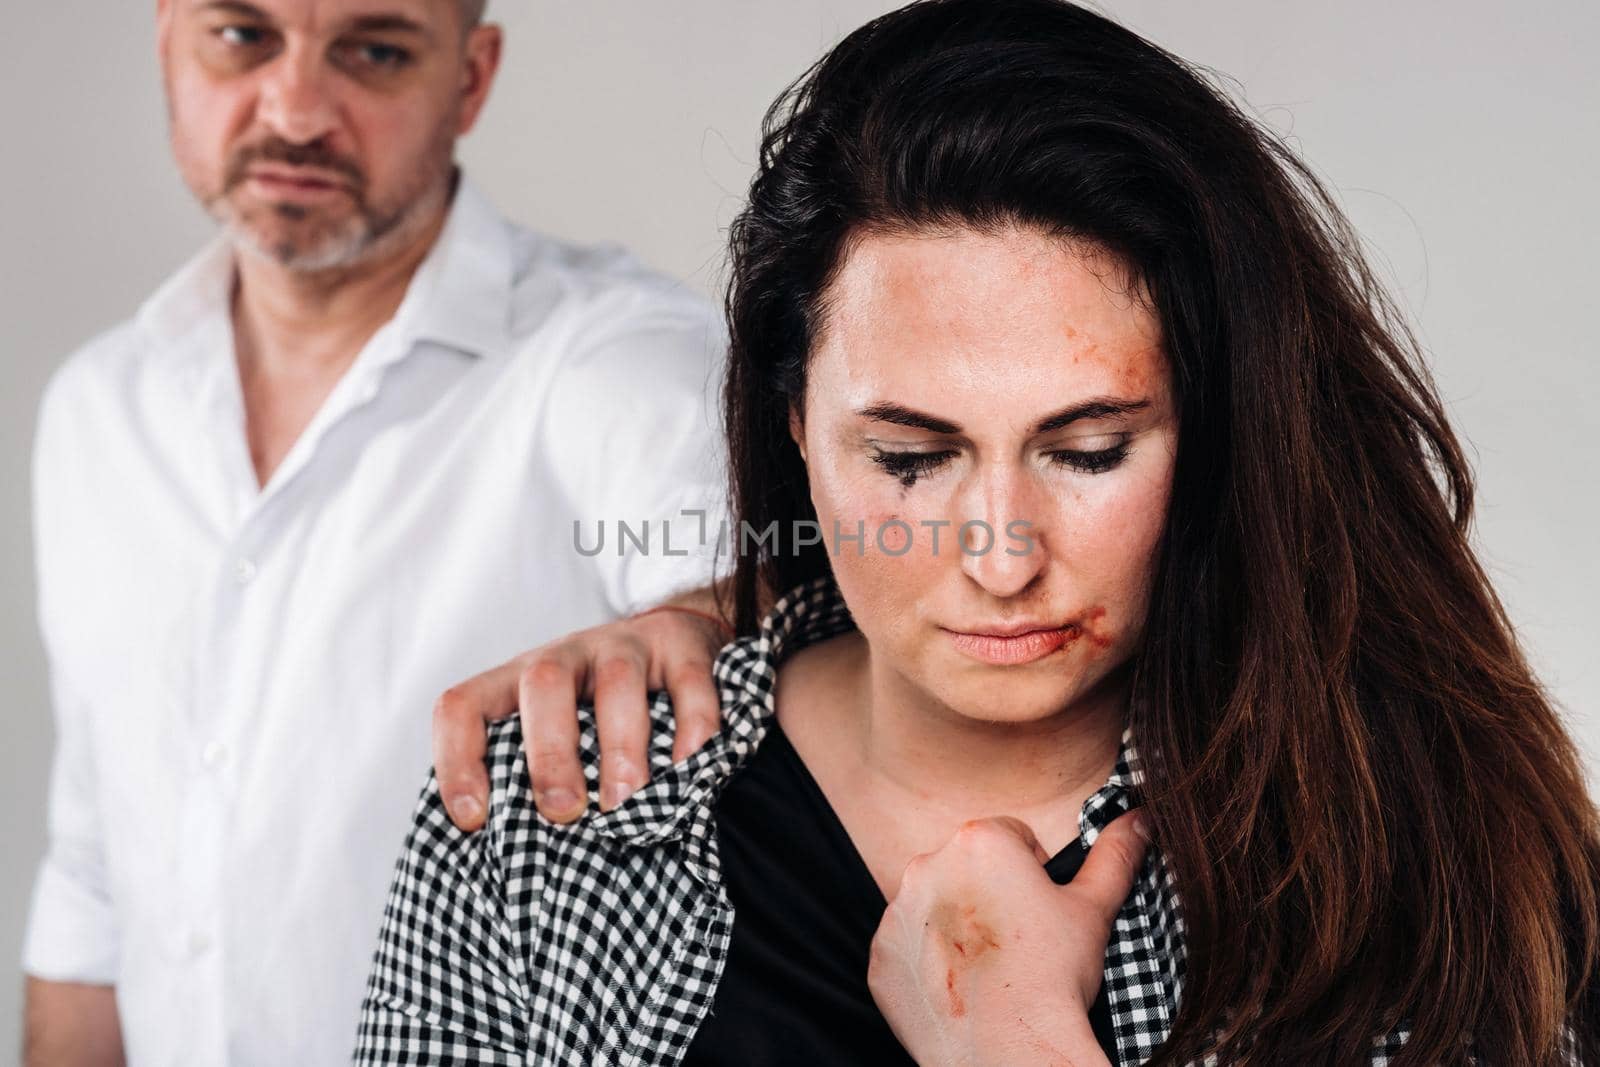 A woman beaten by her husband standing behind her and looking at her aggressively. Domestic violence.